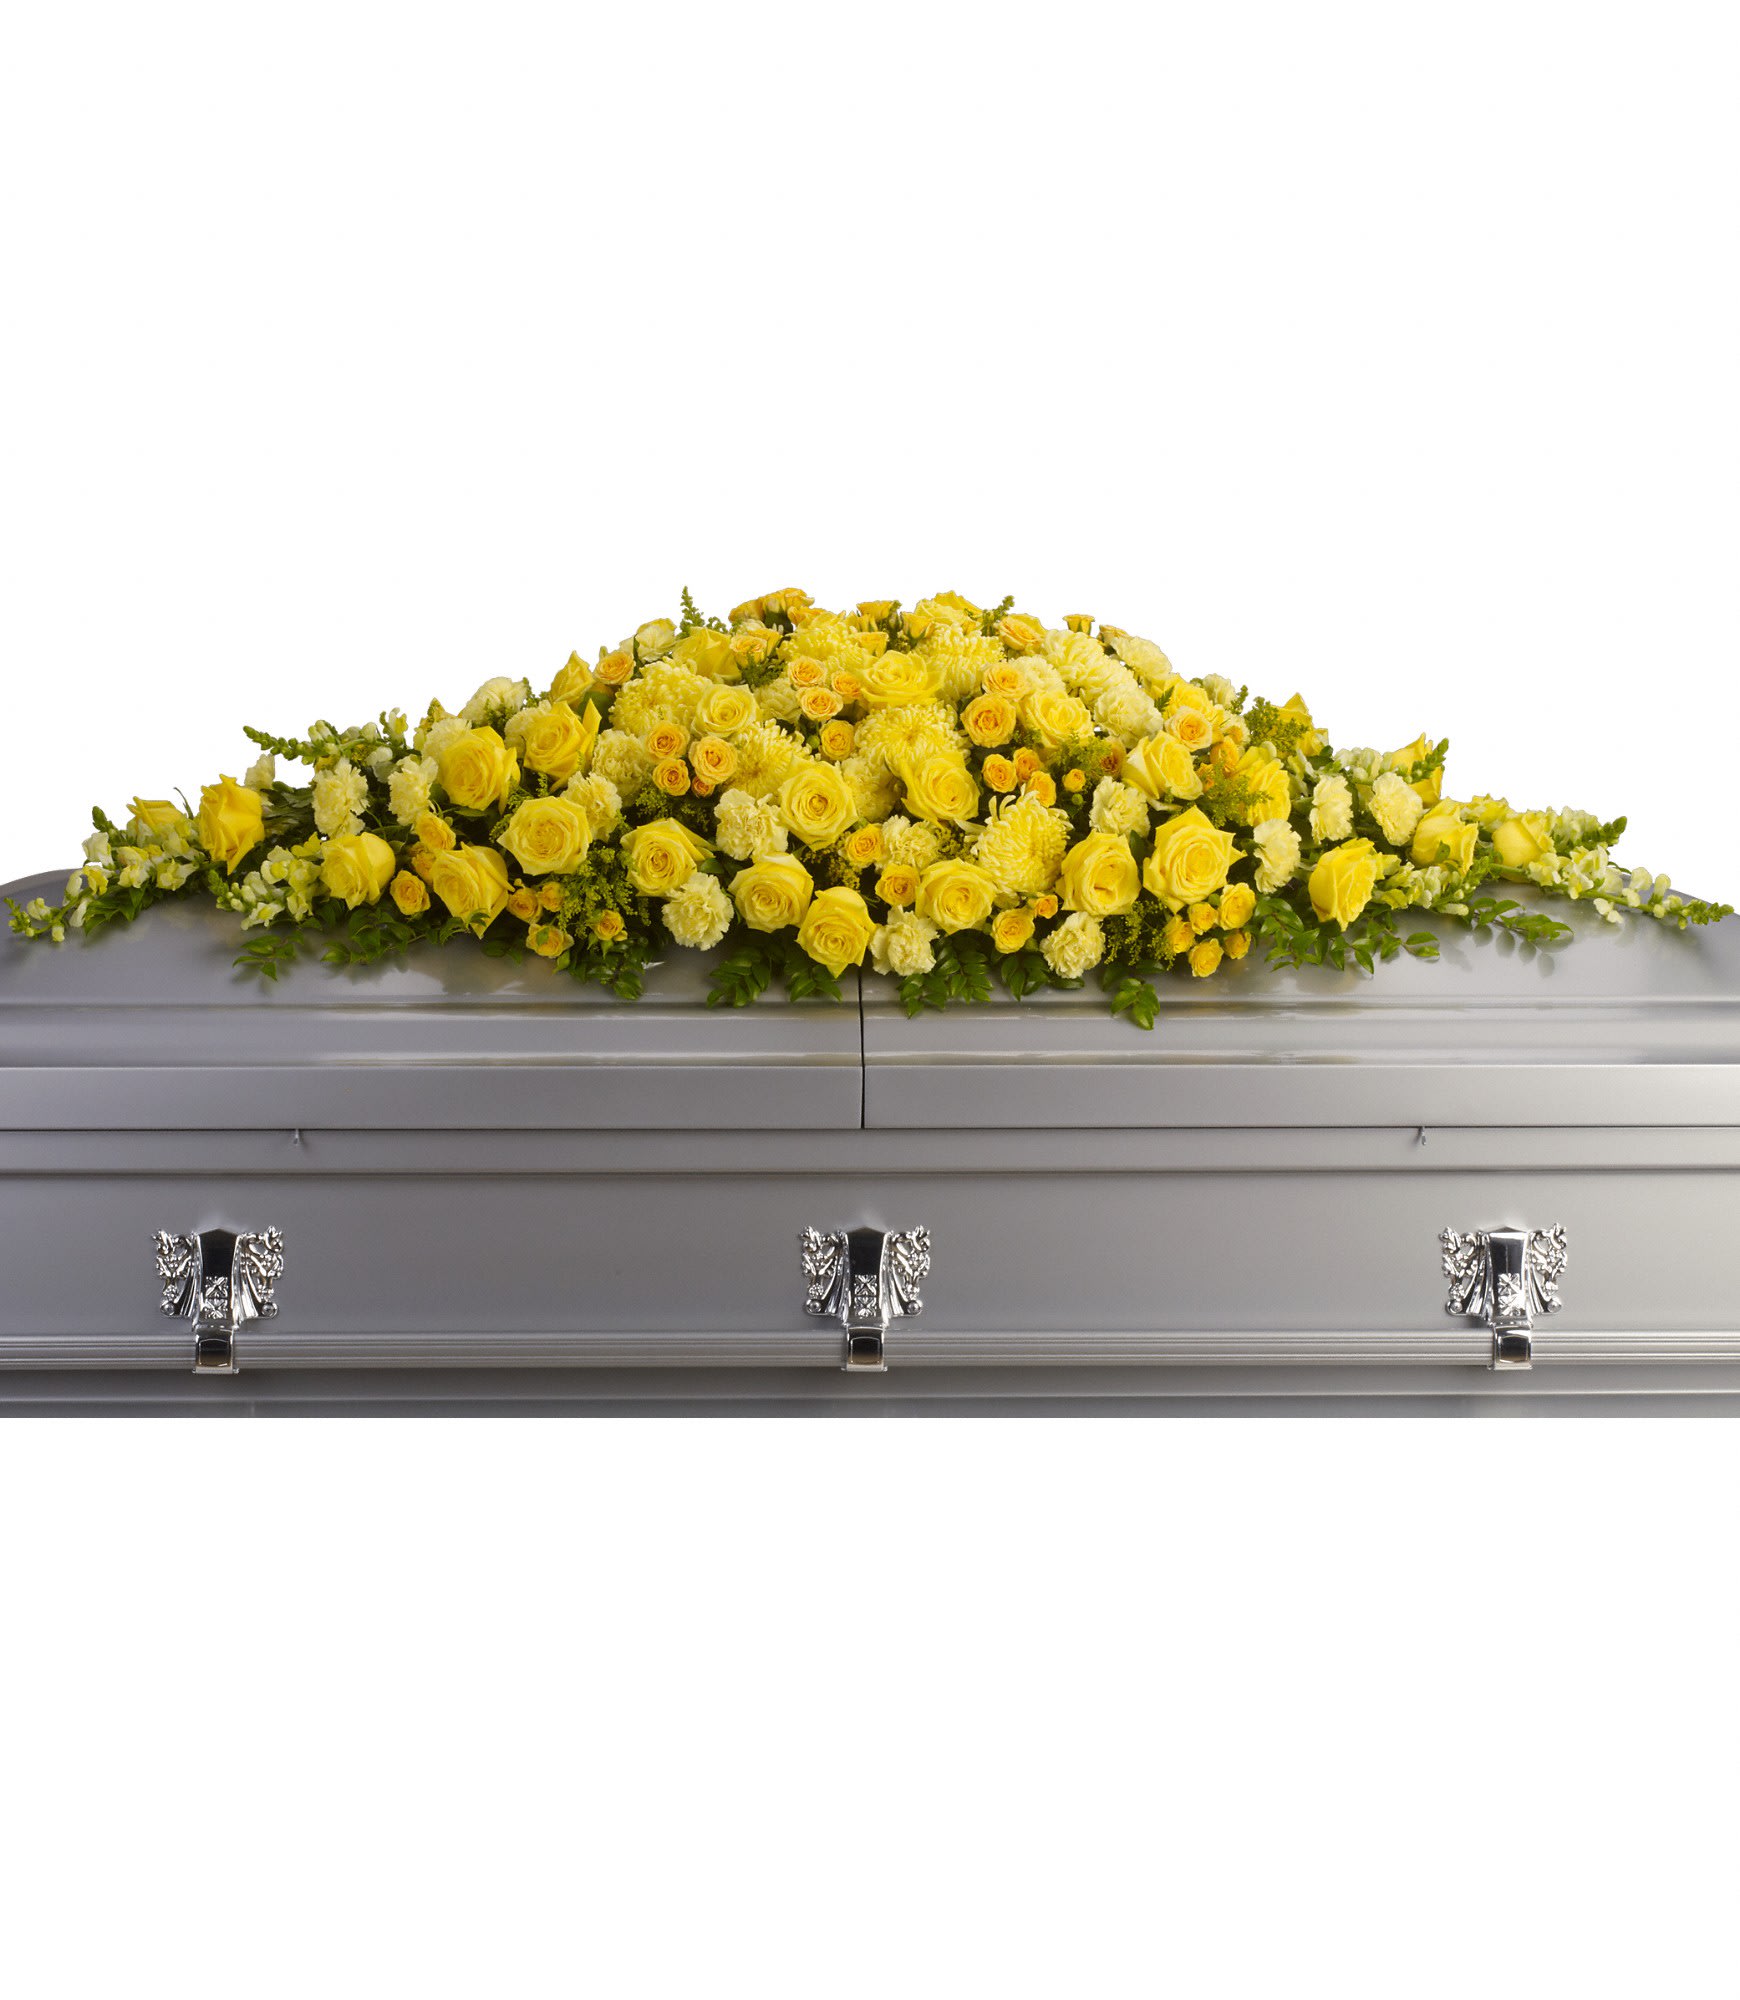 Golden Garden Casket Spray by Teleflora - In our darkest hours, a radiant display of sunshine is sure to warm hearts, especially when the sunshine is delivered in such a beautiful way. This spray offers an abundance of brilliant yellow blossoms.  